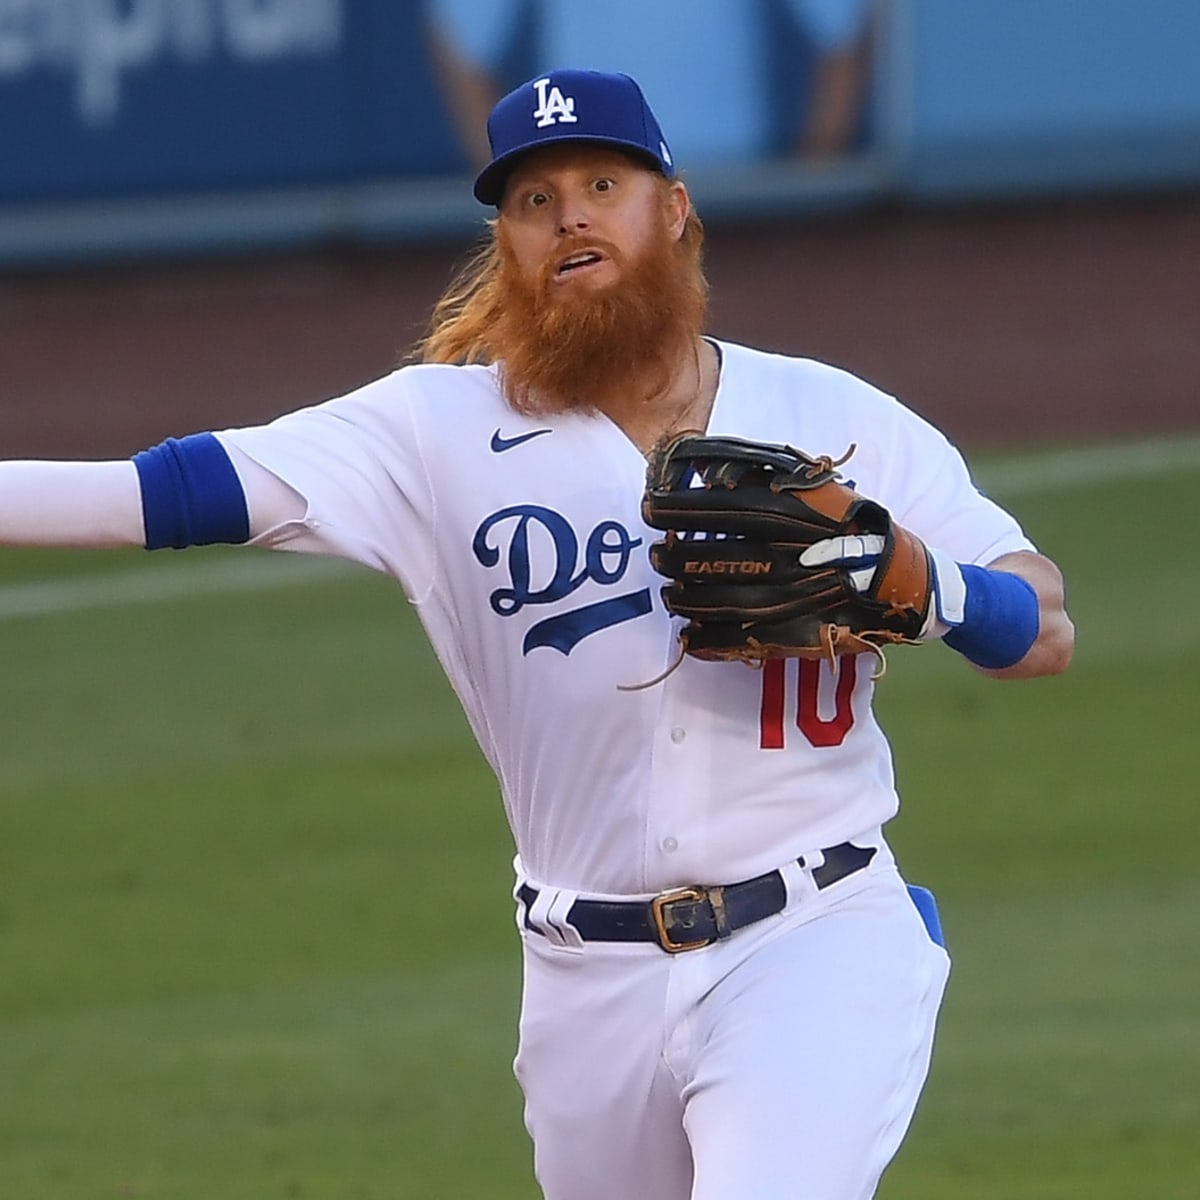 Justin Turner, 'the Glue' of the Dodgers, Swiftly Returns to Babe